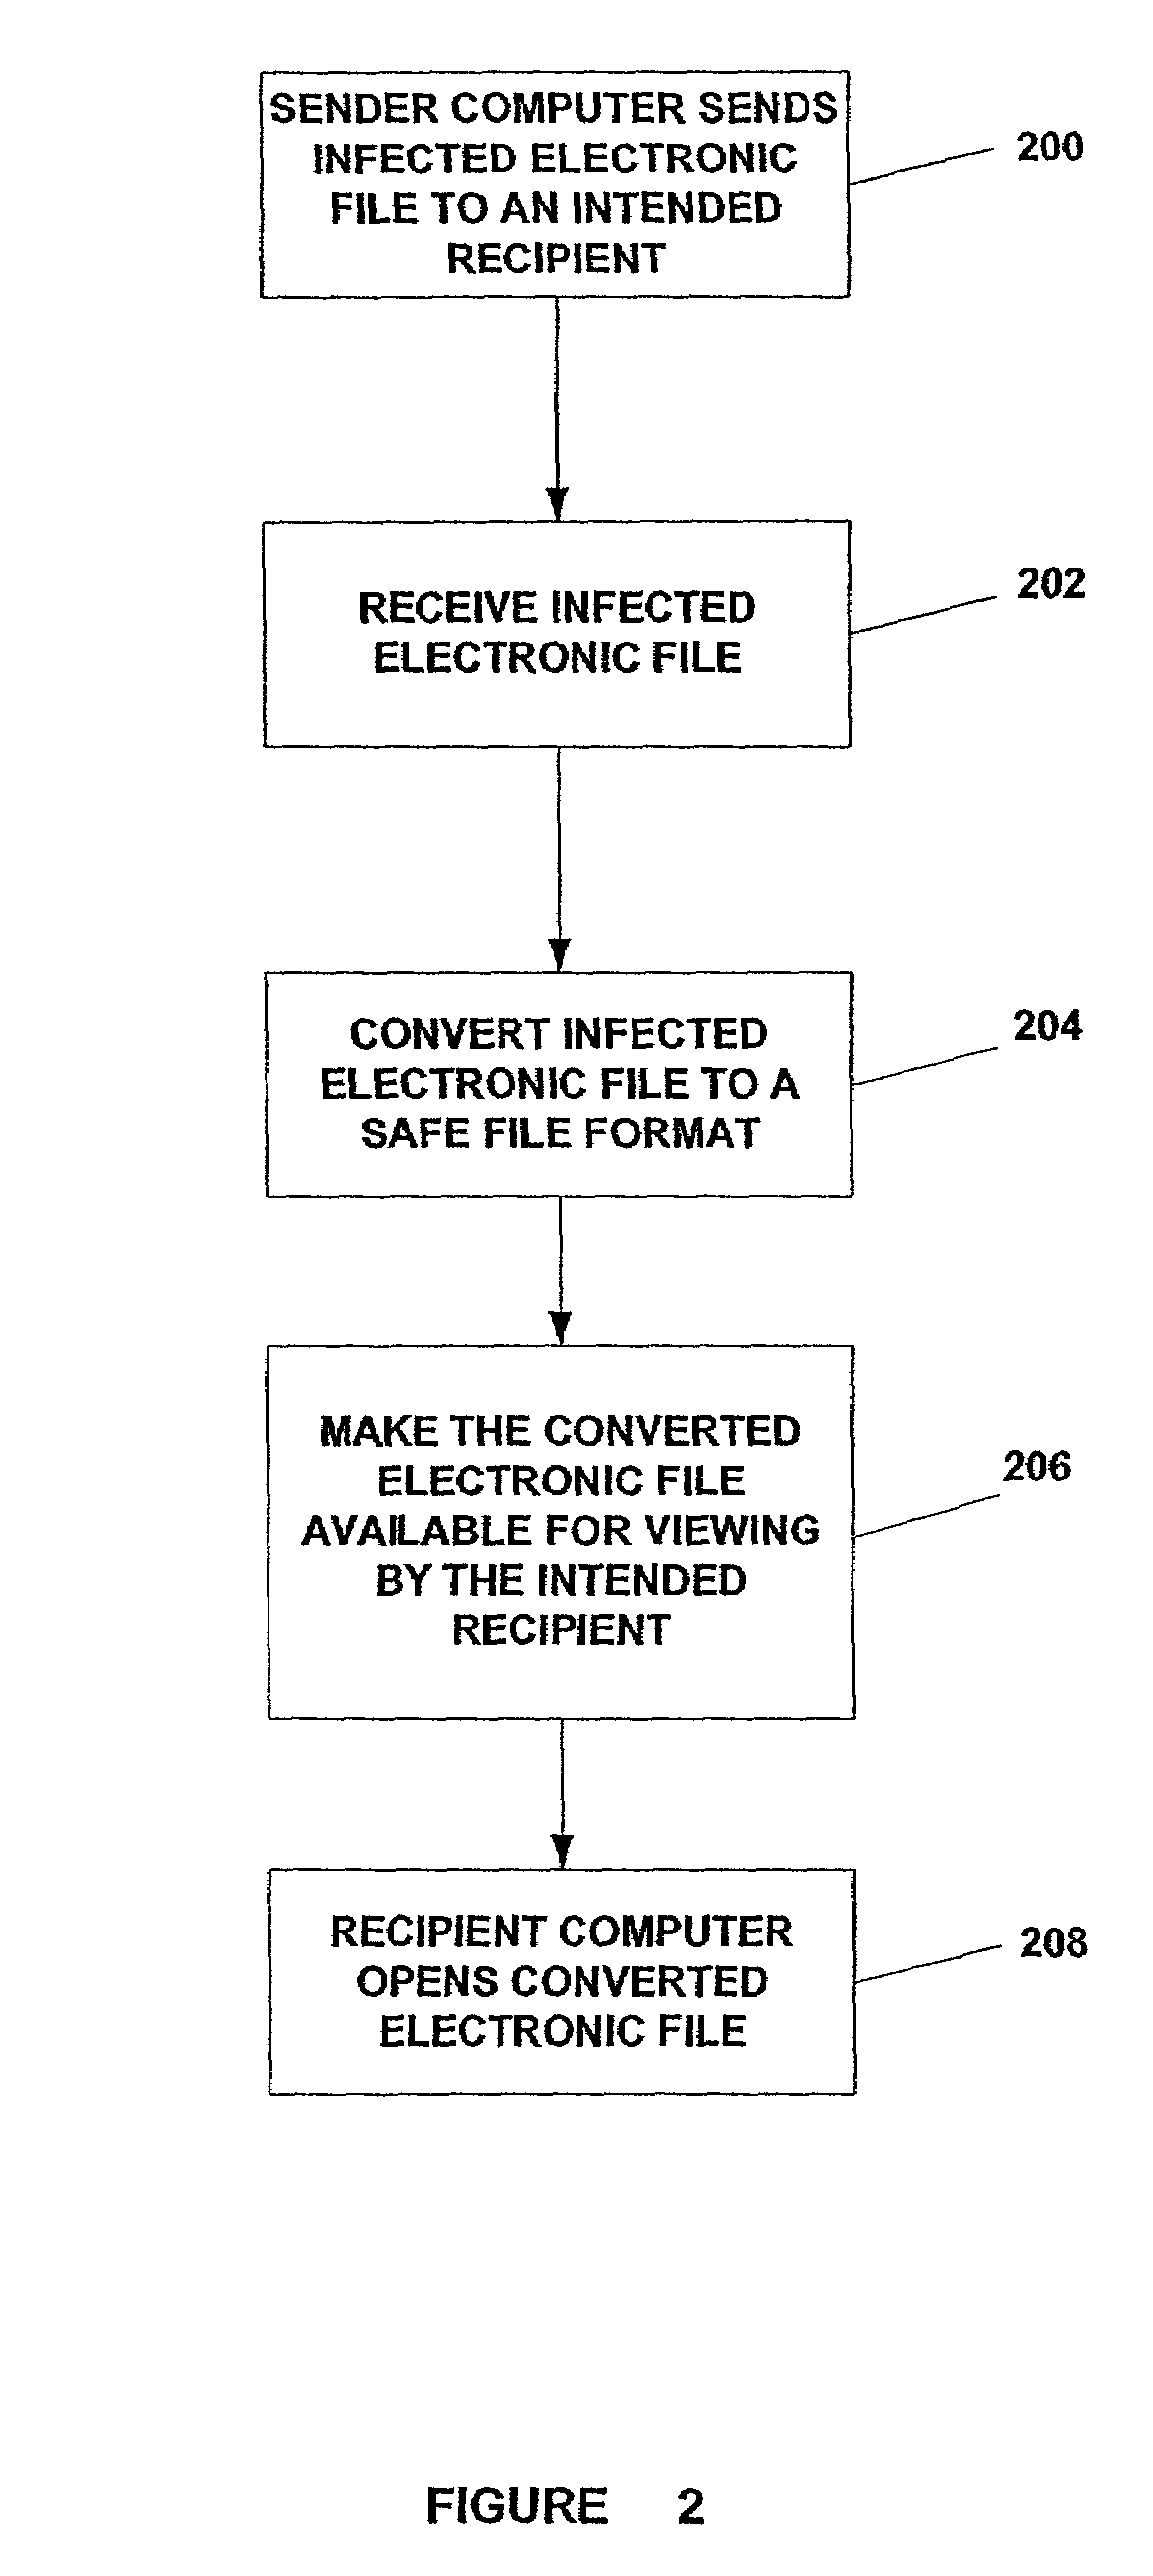 Systems and methods for making electronic files that have been converted to a safe format available for viewing by an intended recipient